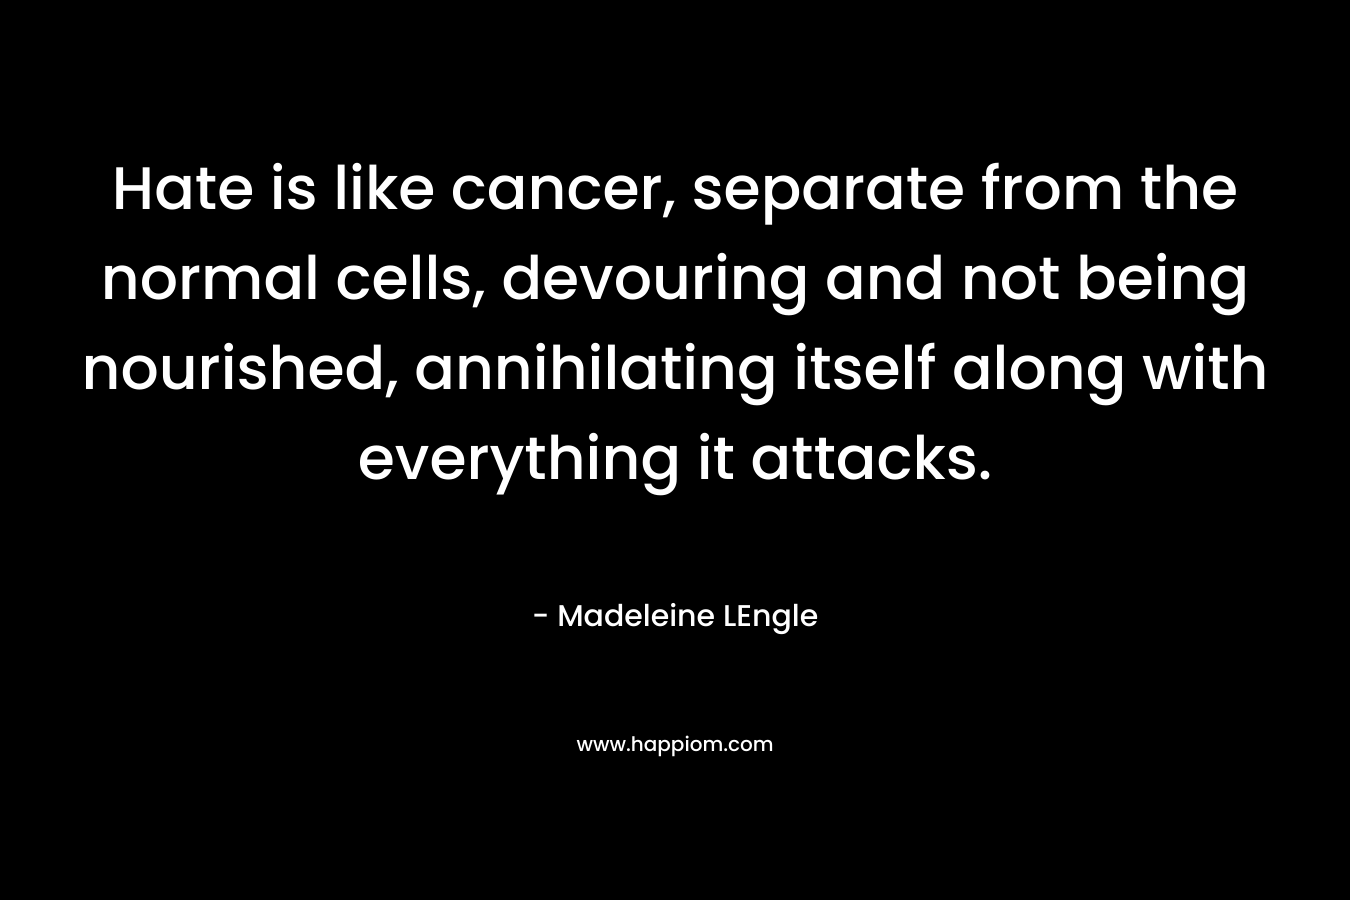 Hate is like cancer, separate from the normal cells, devouring and not being nourished, annihilating itself along with everything it attacks. – Madeleine LEngle